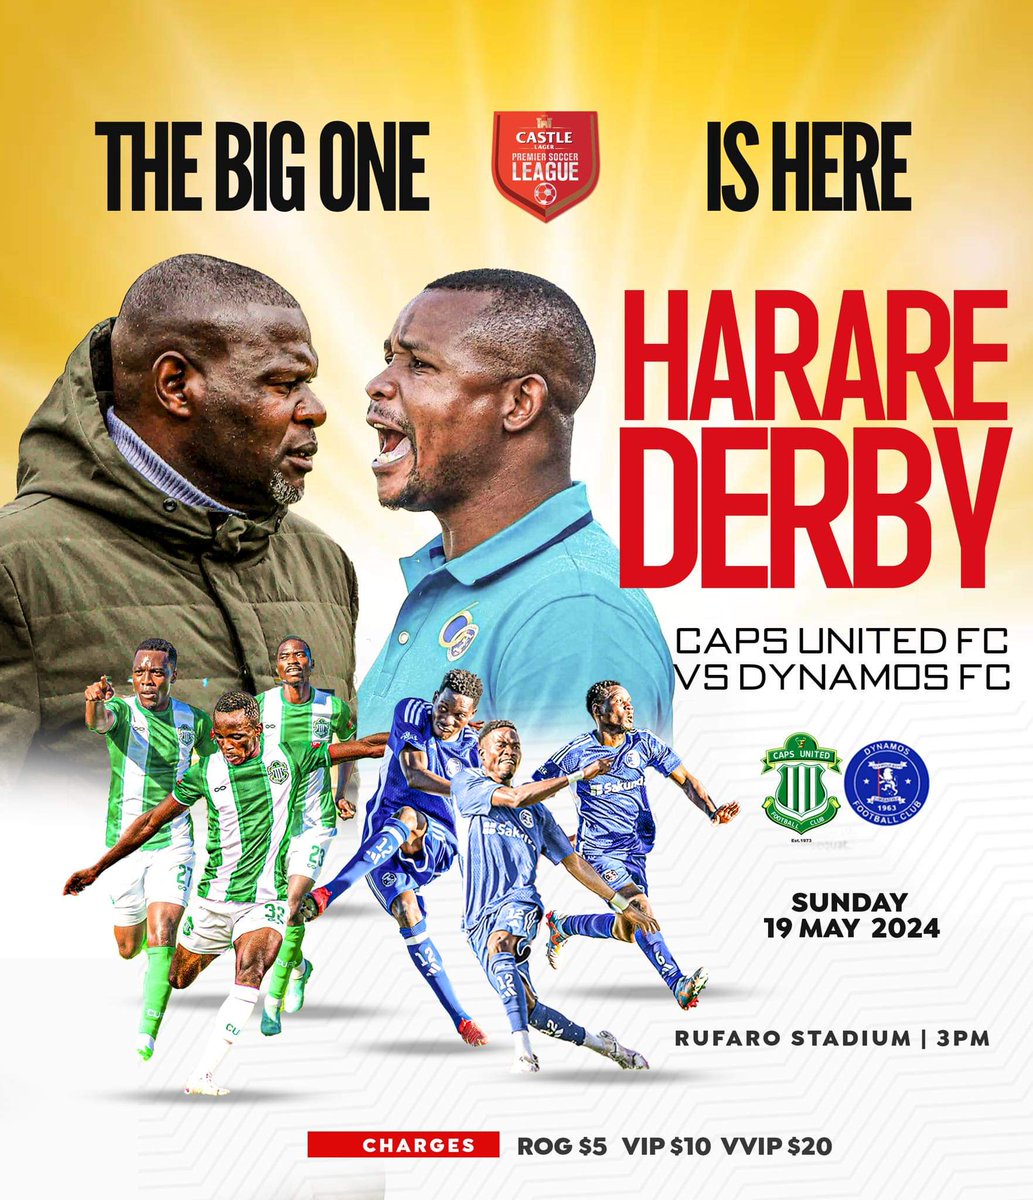 We'll be broadcasting the Harare Derby #PSL match live from Rufaro Stadium starting at 3pm this afternoon. #Dyanamos #CapsUnited @CastleLagerPSL #RufaroStadium